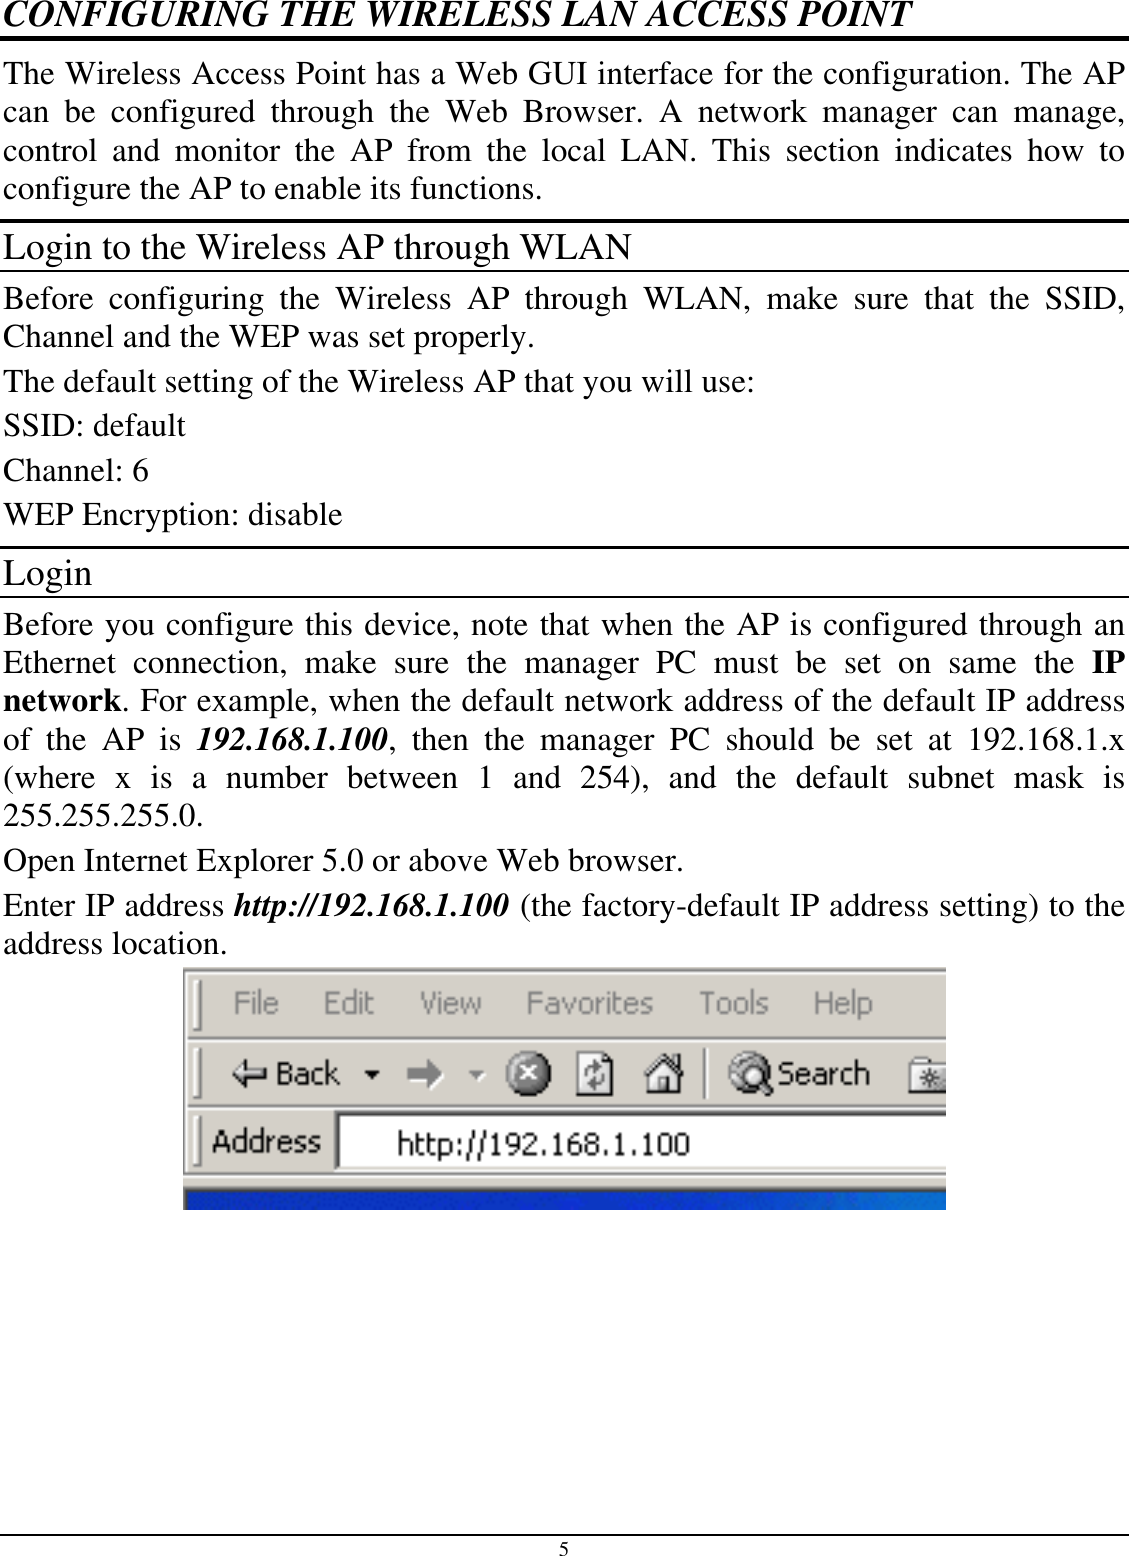 5 CONFIGURING THE WIRELESS LAN ACCESS POINT The Wireless Access Point has a Web GUI interface for the configuration. The AP can be configured through the Web Browser. A network manager can manage, control and monitor the AP from the local LAN. This section indicates how to configure the AP to enable its functions. Login to the Wireless AP through WLAN Before configuring the Wireless AP through WLAN, make sure that the SSID, Channel and the WEP was set properly. The default setting of the Wireless AP that you will use: SSID: default Channel: 6 WEP Encryption: disable Login Before you configure this device, note that when the AP is configured through an Ethernet connection, make sure the manager PC must be set on same the IP network. For example, when the default network address of the default IP address of the AP is 192.168.1.100, then the manager PC should be set at 192.168.1.x (where x is a number between 1 and 254), and the default subnet mask is 255.255.255.0. Open Internet Explorer 5.0 or above Web browser. Enter IP address http://192.168.1.100 (the factory-default IP address setting) to the address location.  